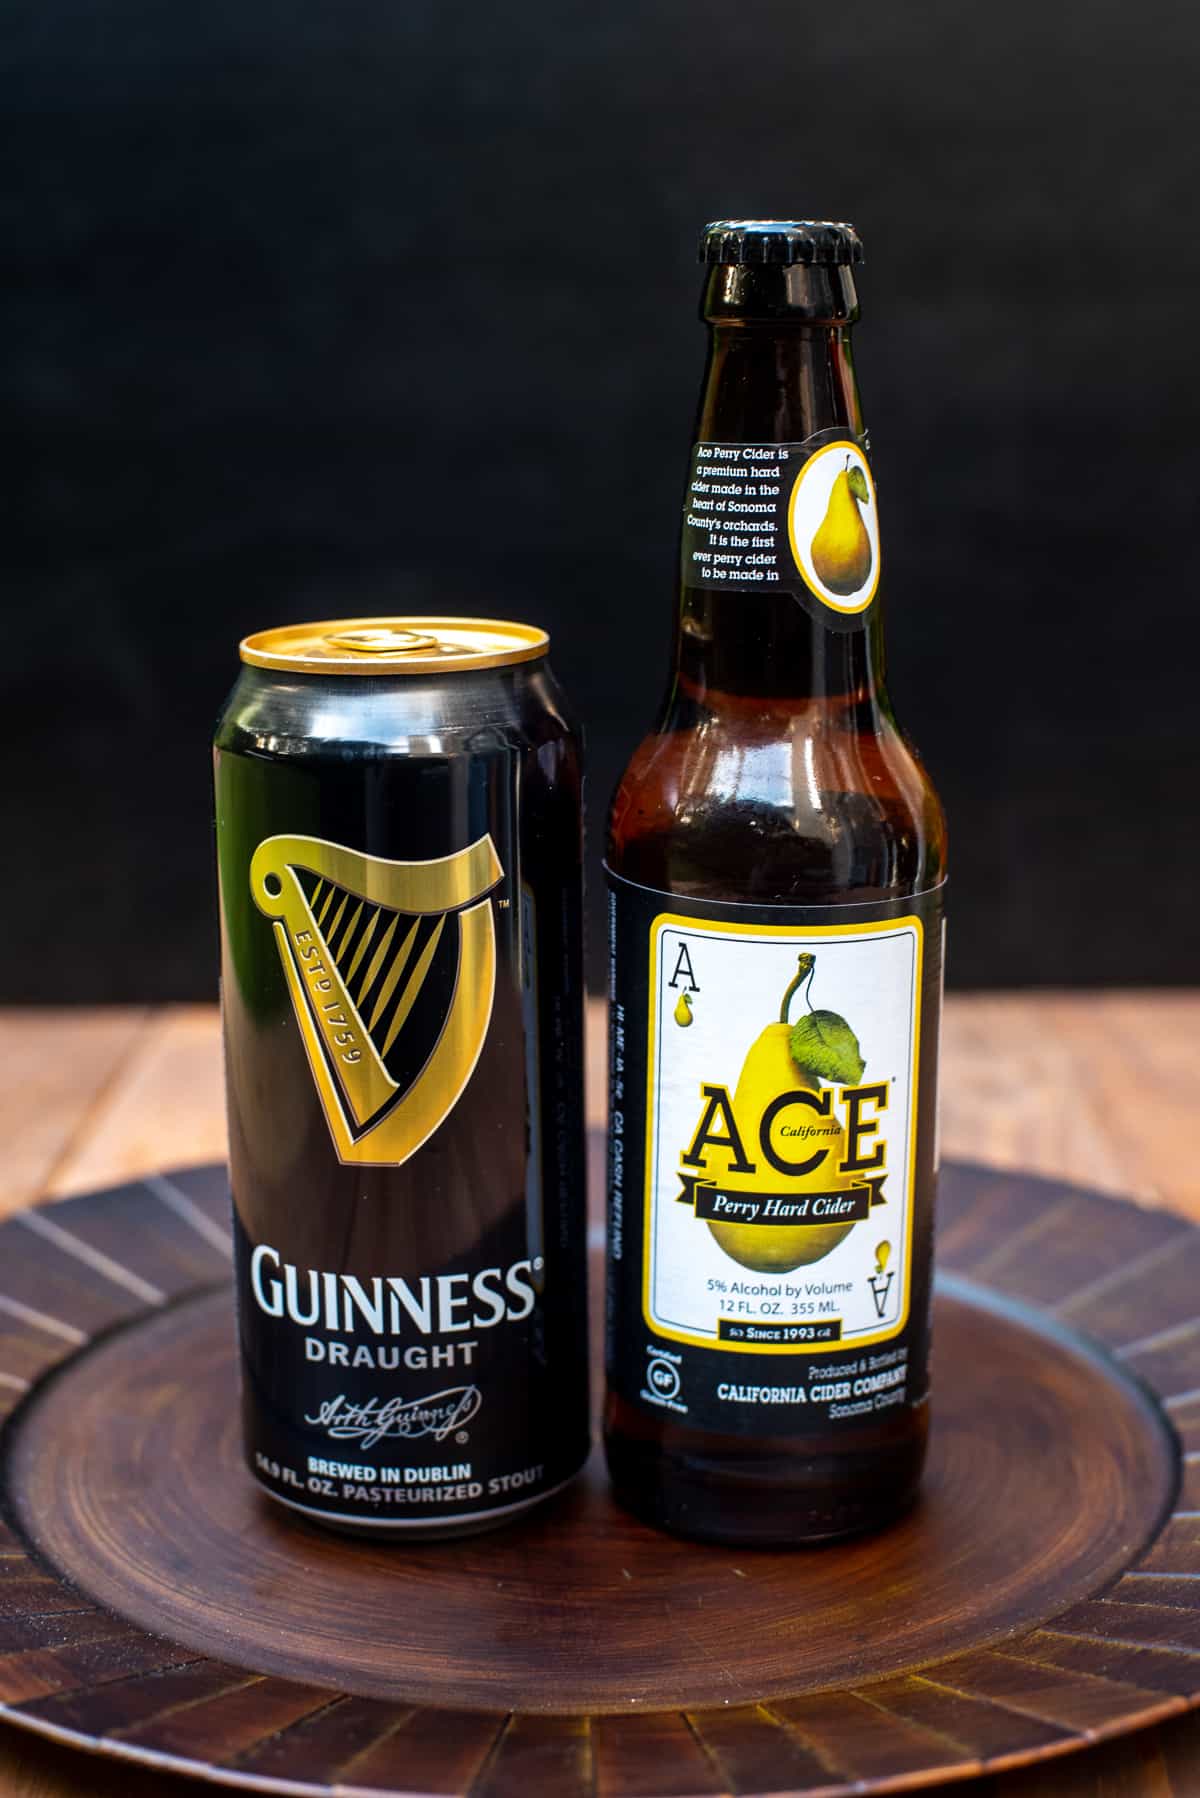 A can of Guinness Draught and a bottle of Ace Pear Cider on a brown platter.